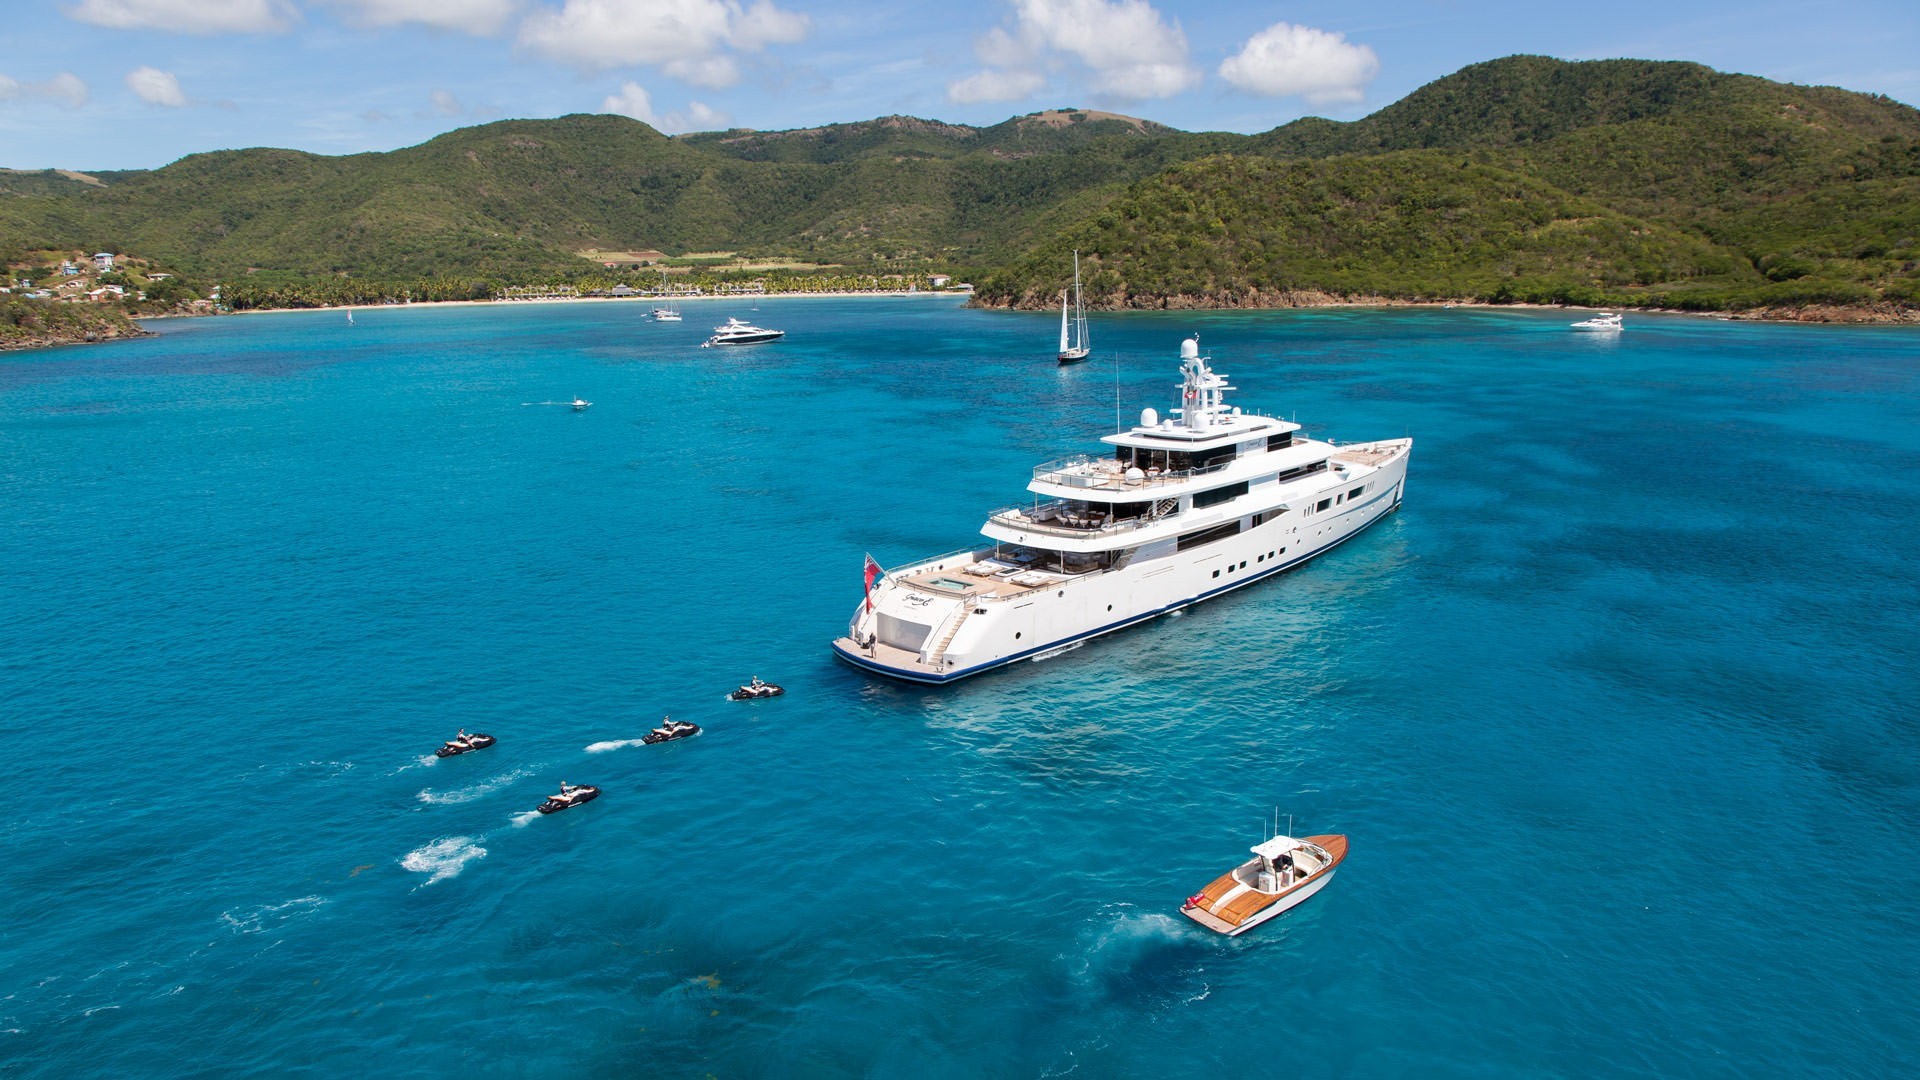 Swiss Billionaire's $90M Superyacht With an Entire Spa Deck Shows